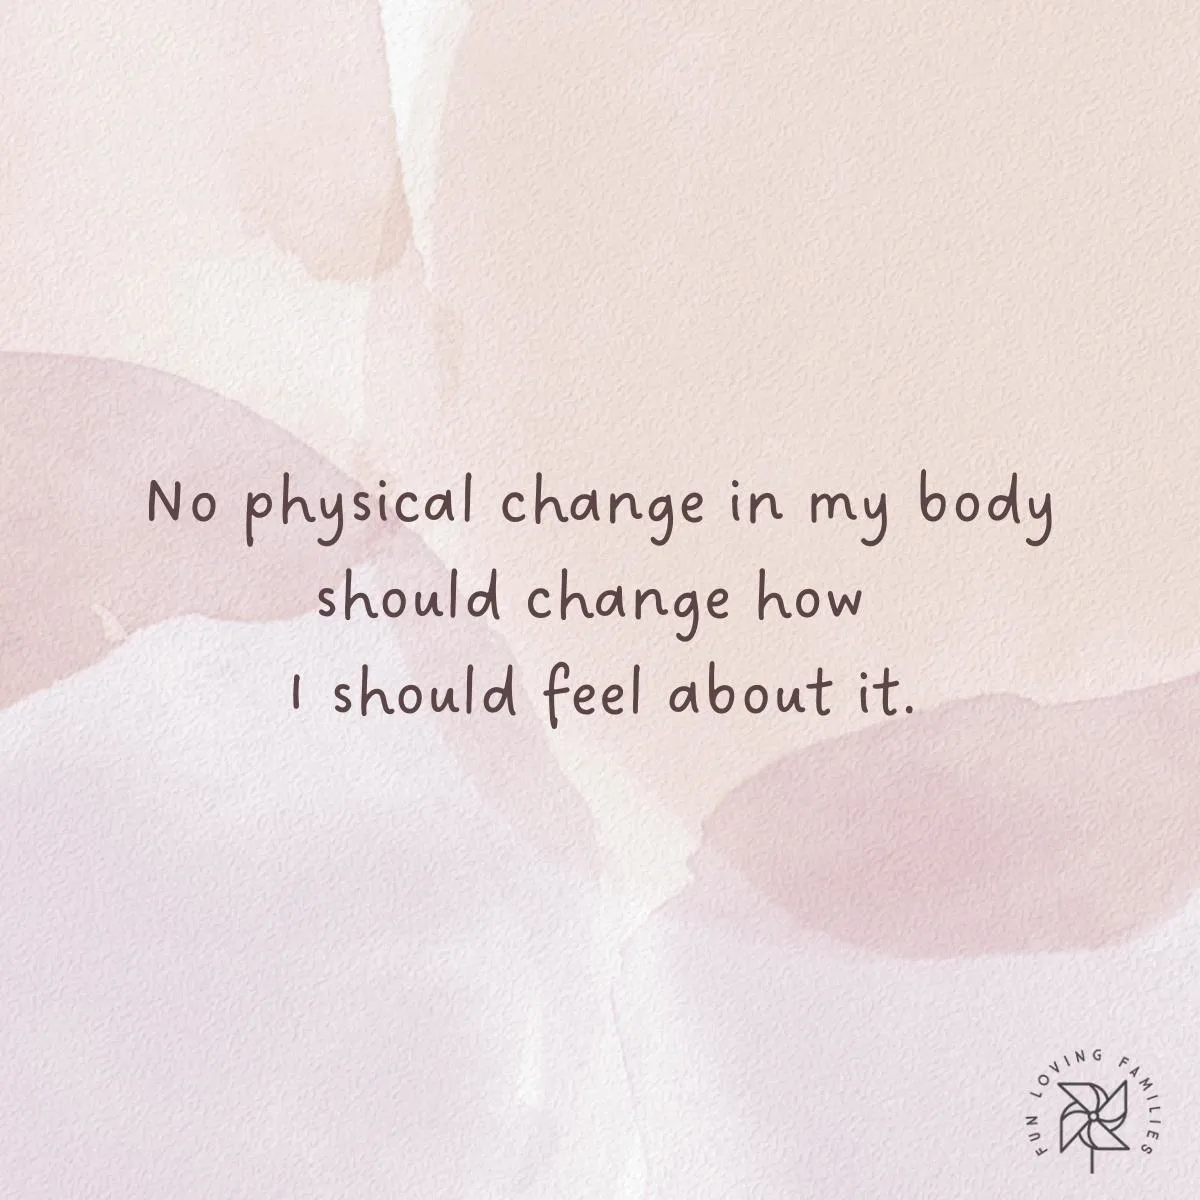 No physical change in my body determines how I should feel affirmation